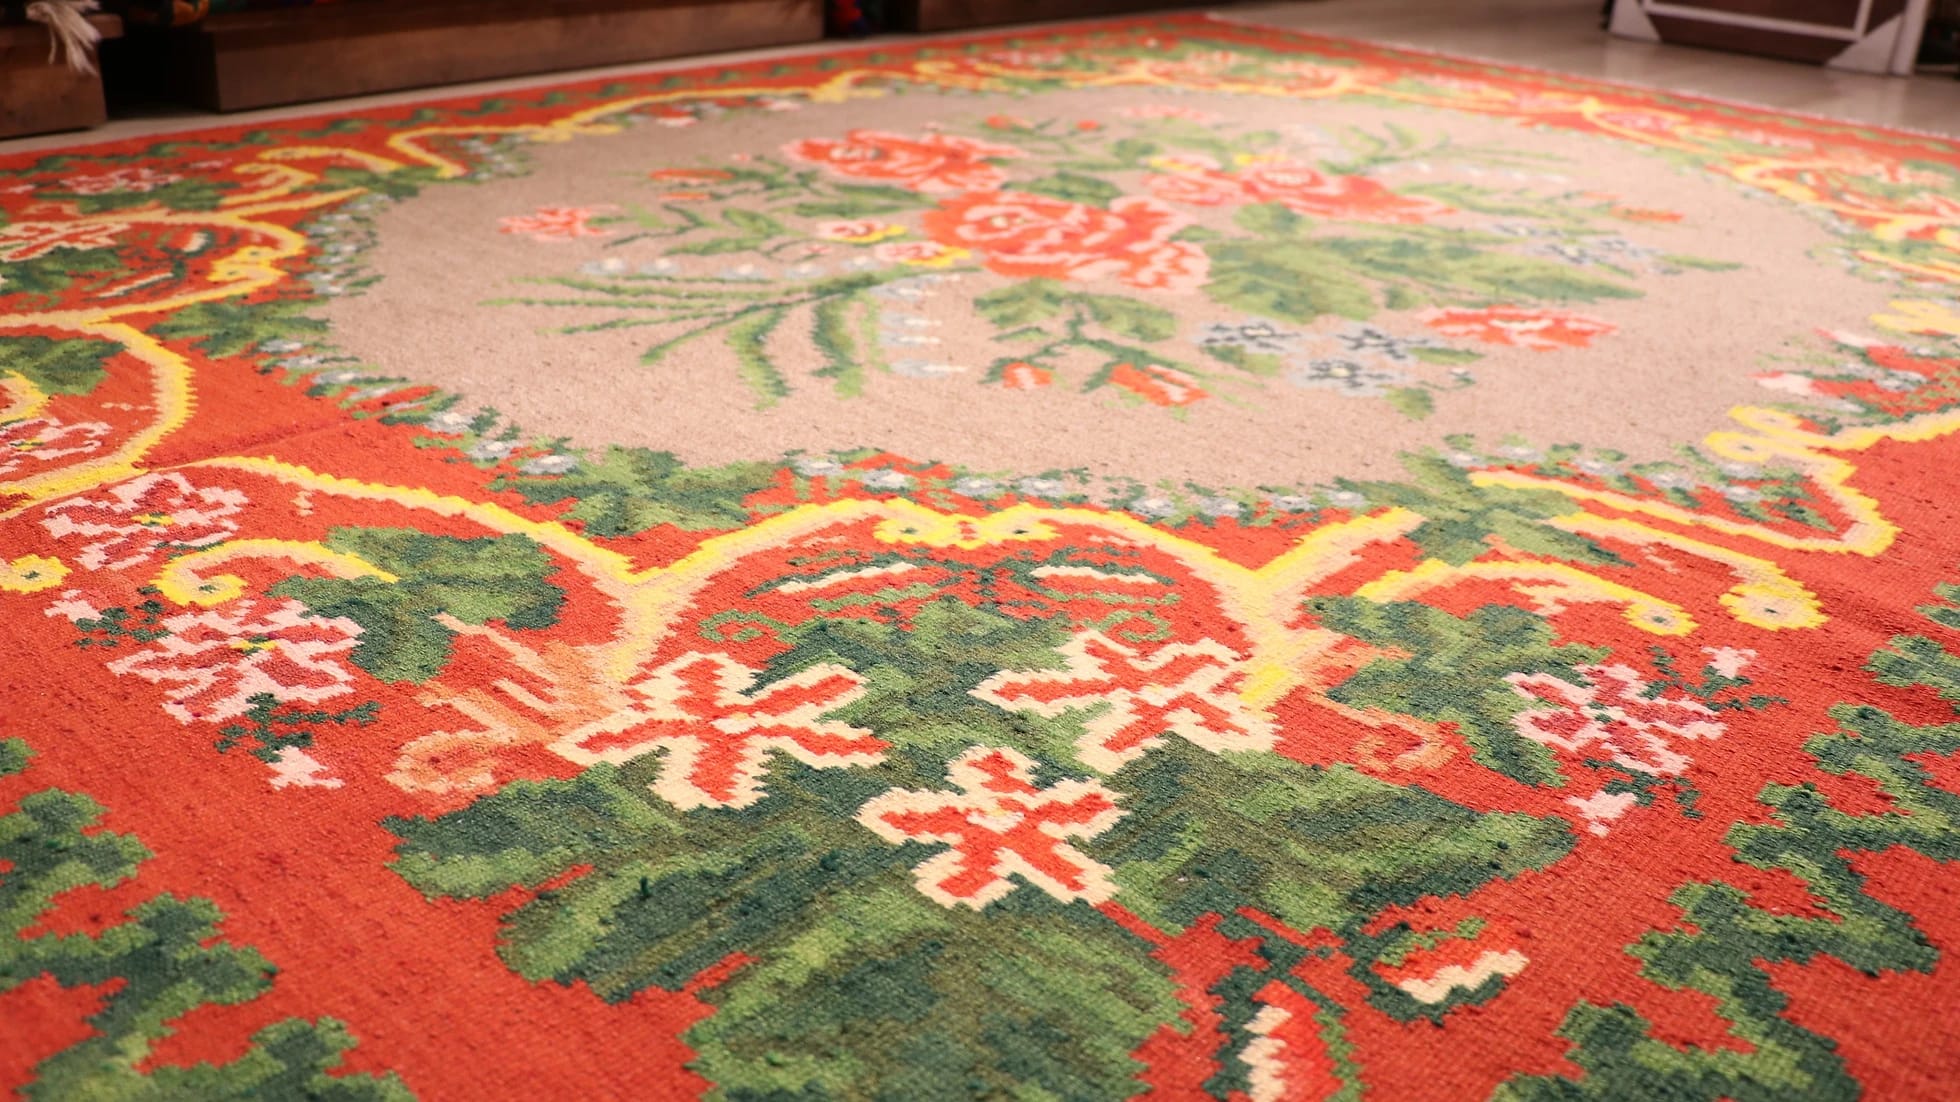 gorgeous Moldovan European tapestry rug from Turkey in flower motifs, floral patterns, and geometric medallion in red, green, yellow, and gray